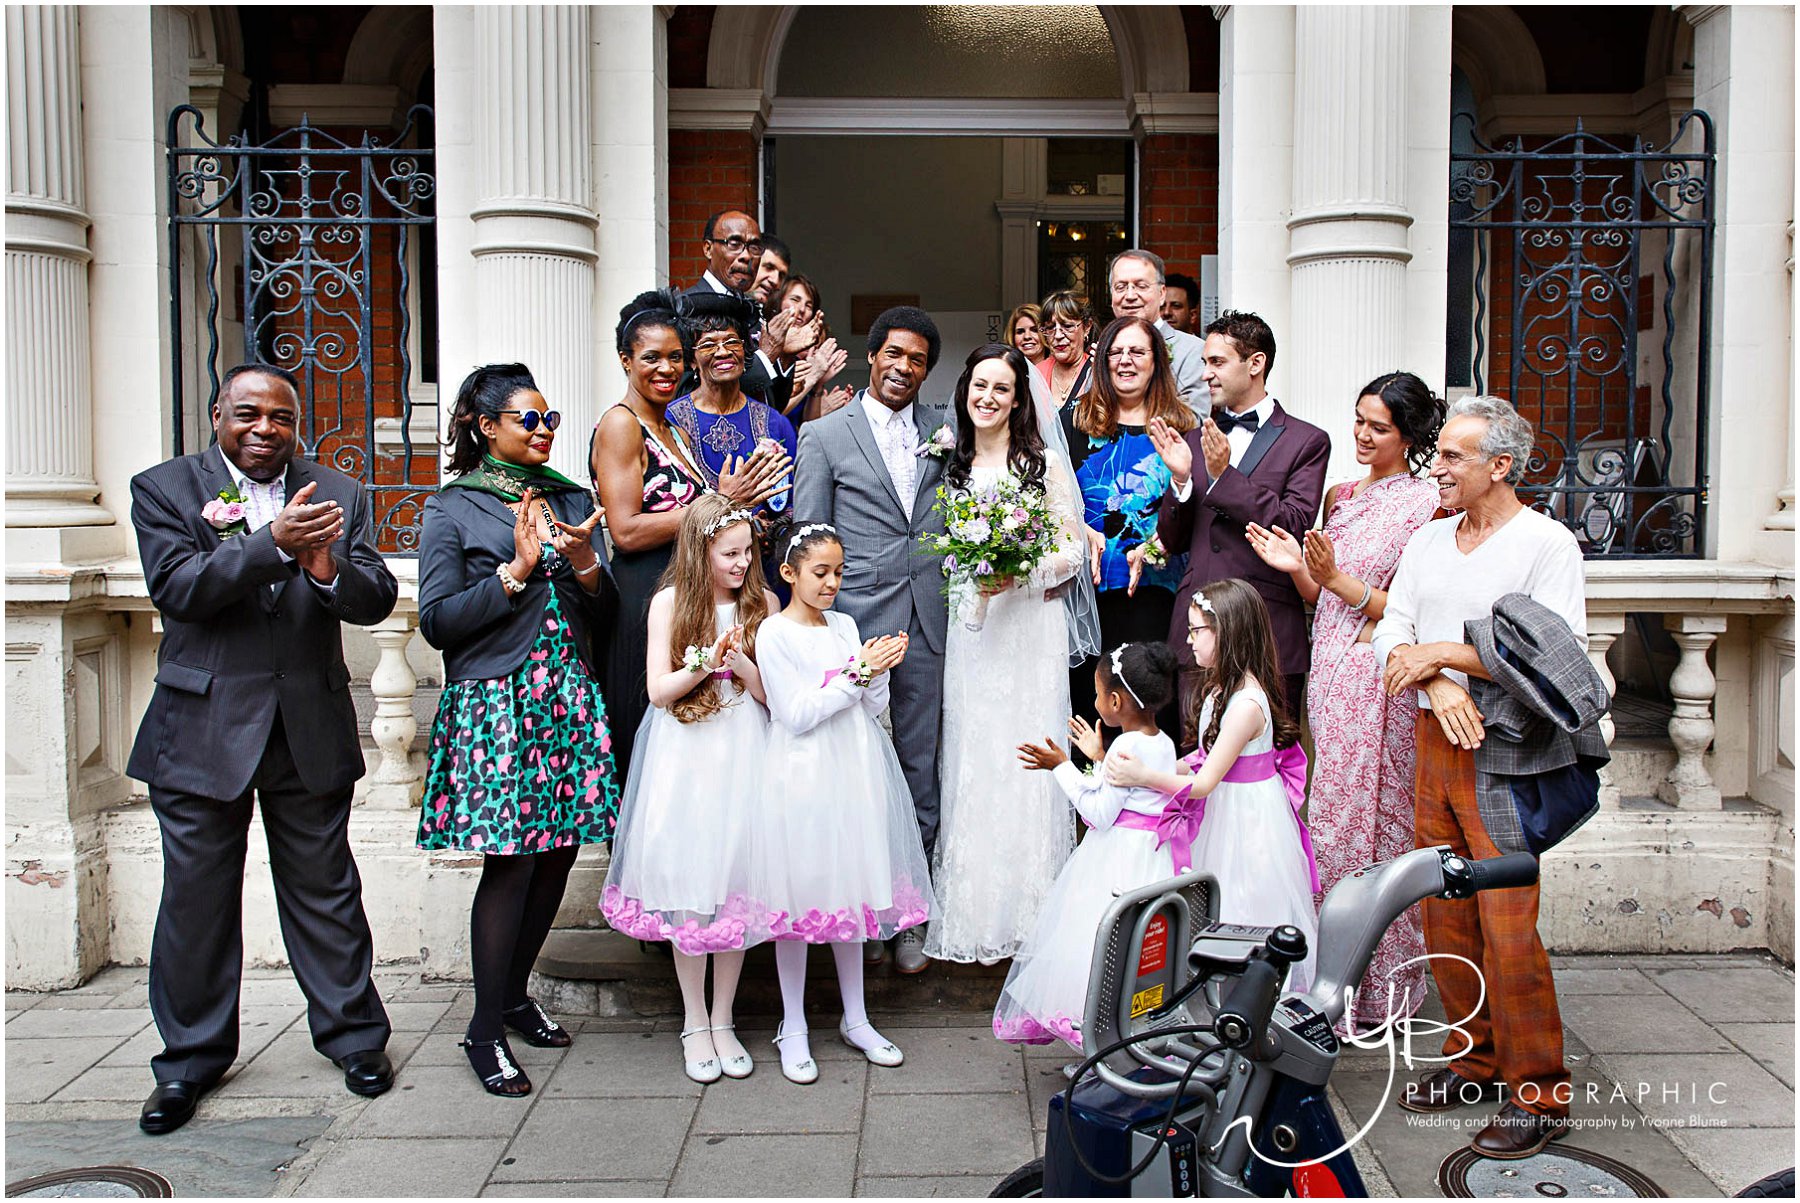 Wedding Photography at Westminster Register Office by YBPHOTOGRAPHIC